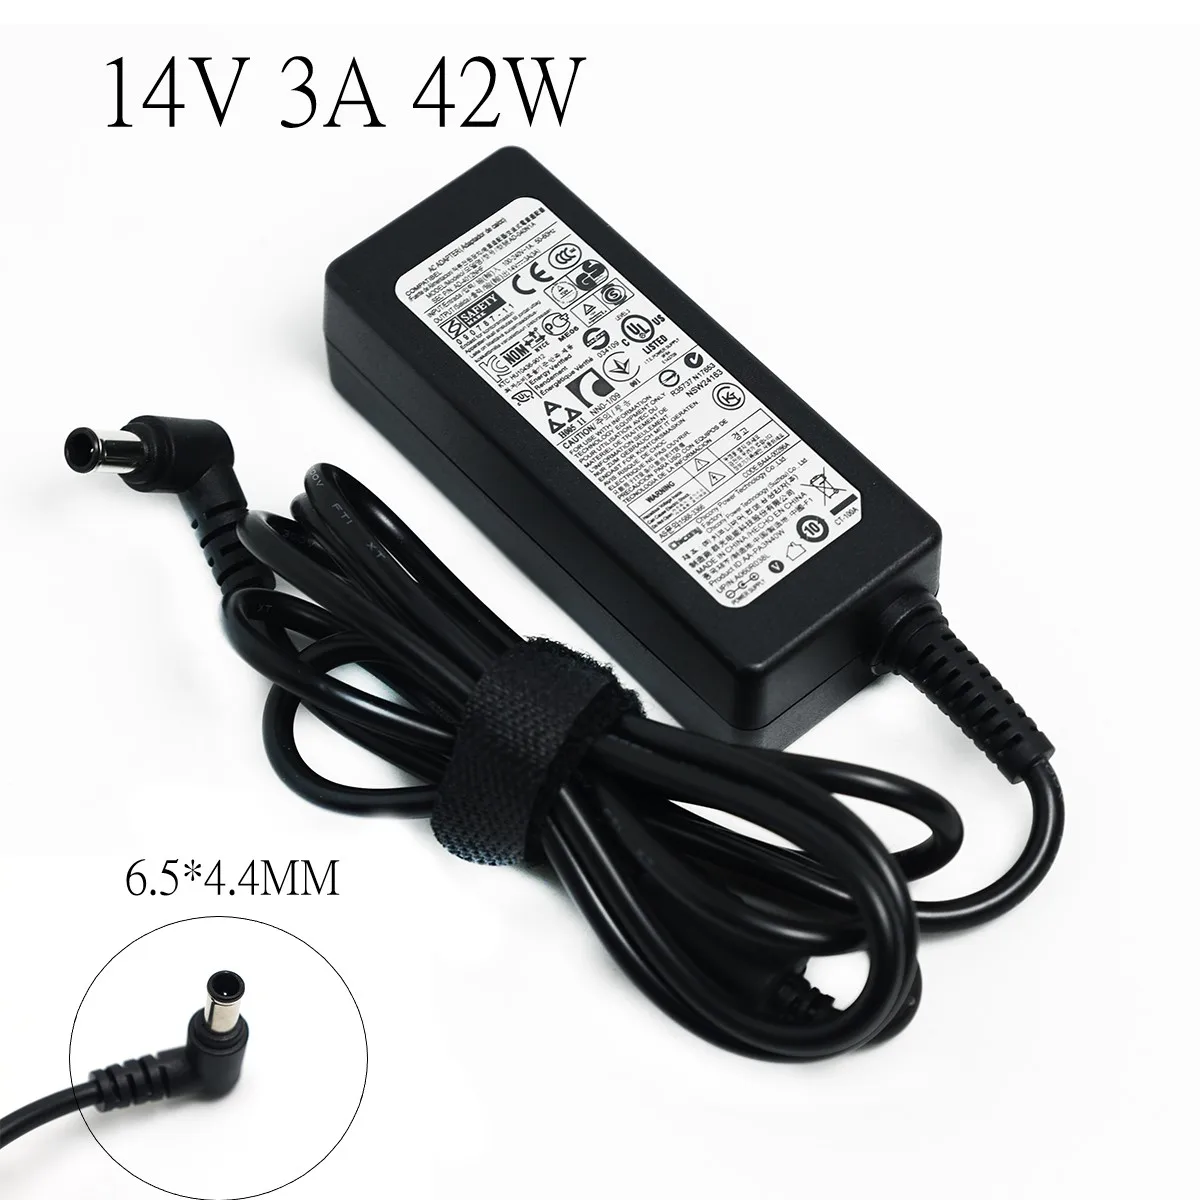 

Power Supply 14V 3A AC Adapter Charger For Samsung LCD Monitor A2514_DPN A3014 AD-3014B B3014NC SA300 SA330 SA350 B3014NC F50